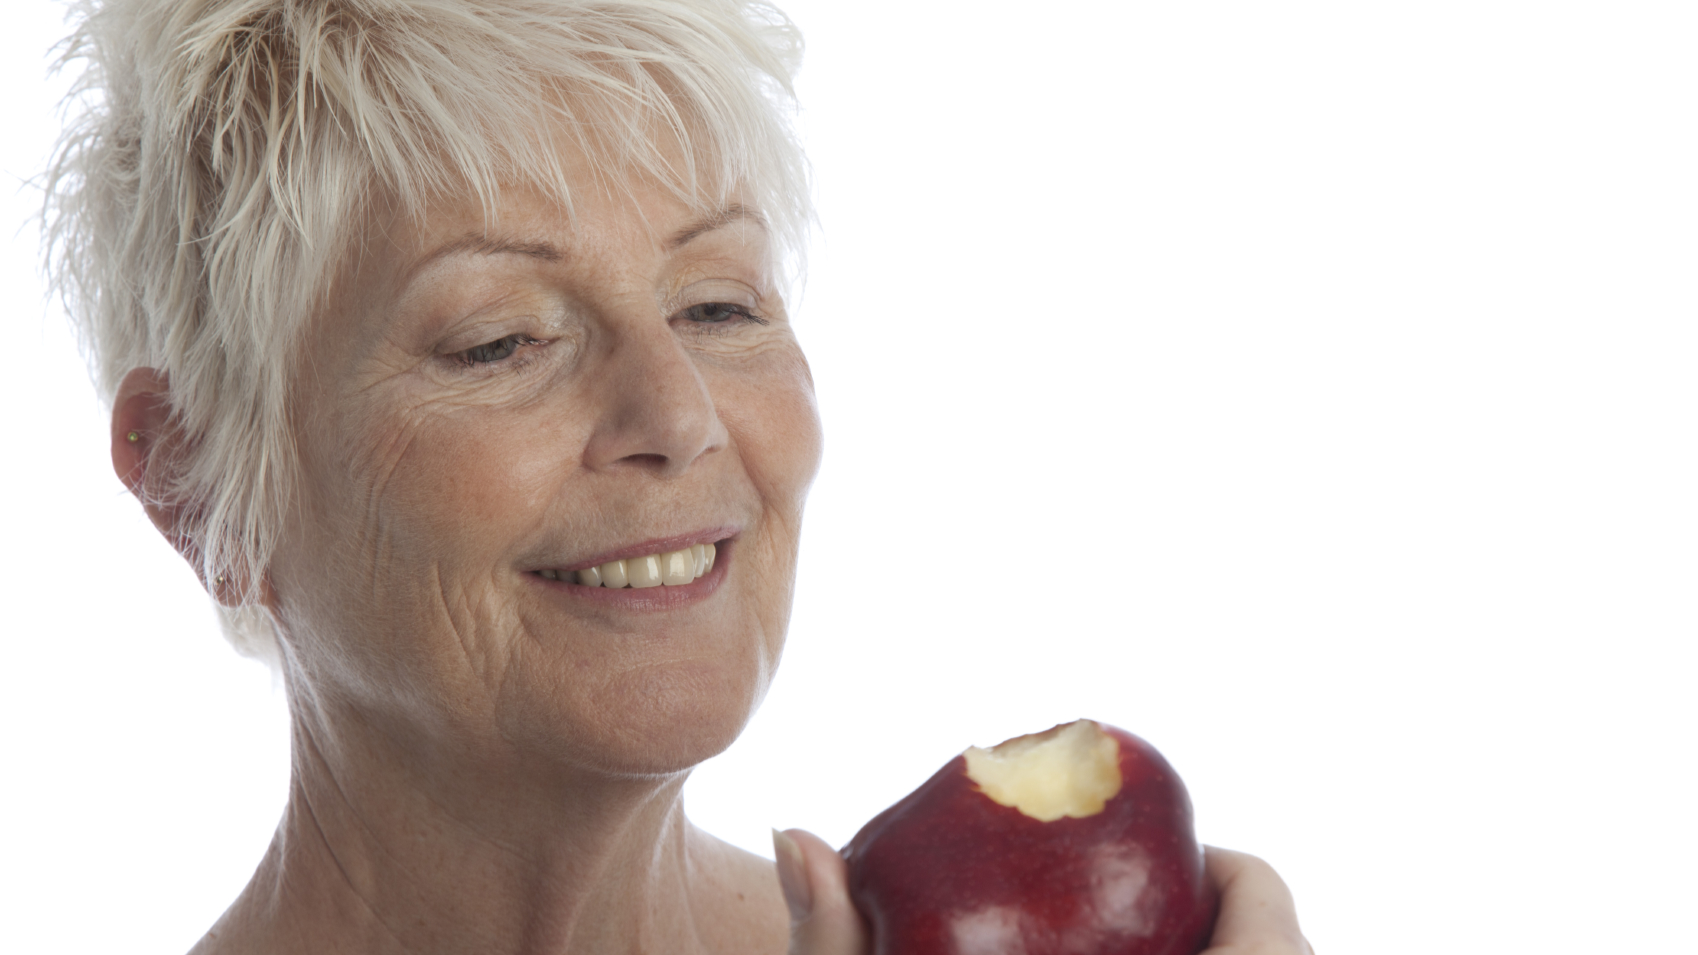 A woman eating a red apple.